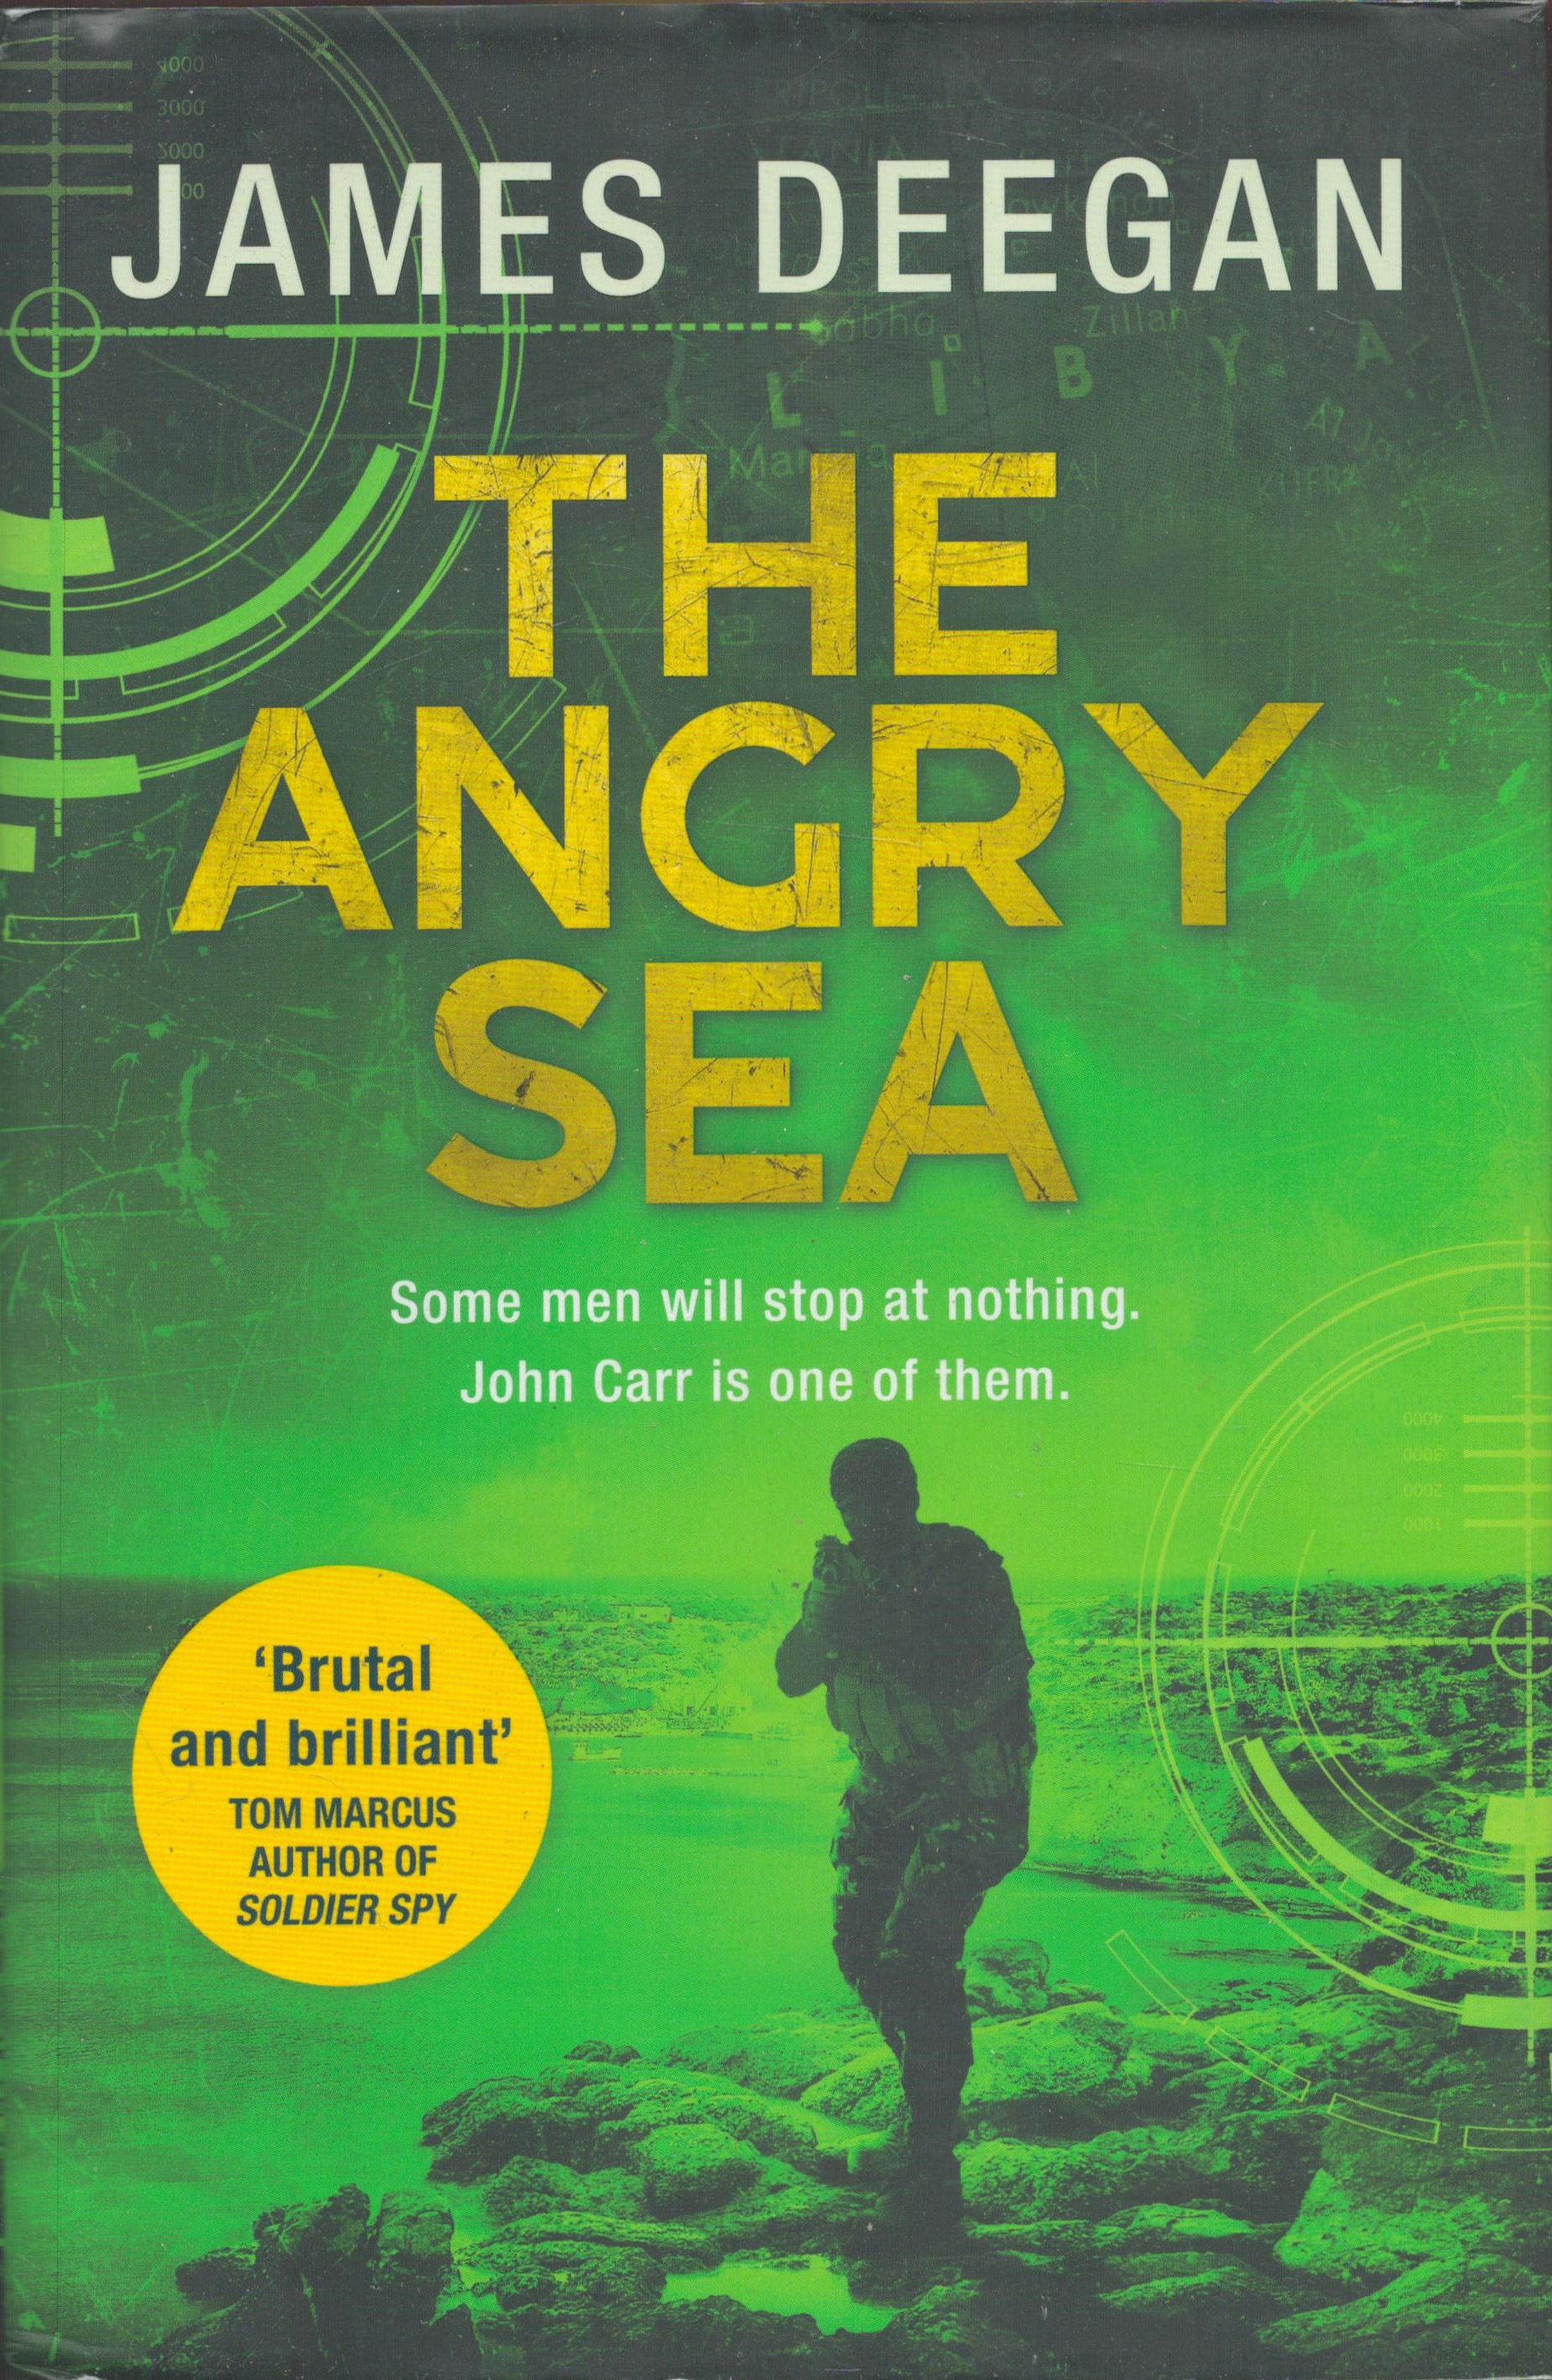 The Angry Sea by James Deegan 2019 First Edition Hardback Book with 498 pages published by HQ (